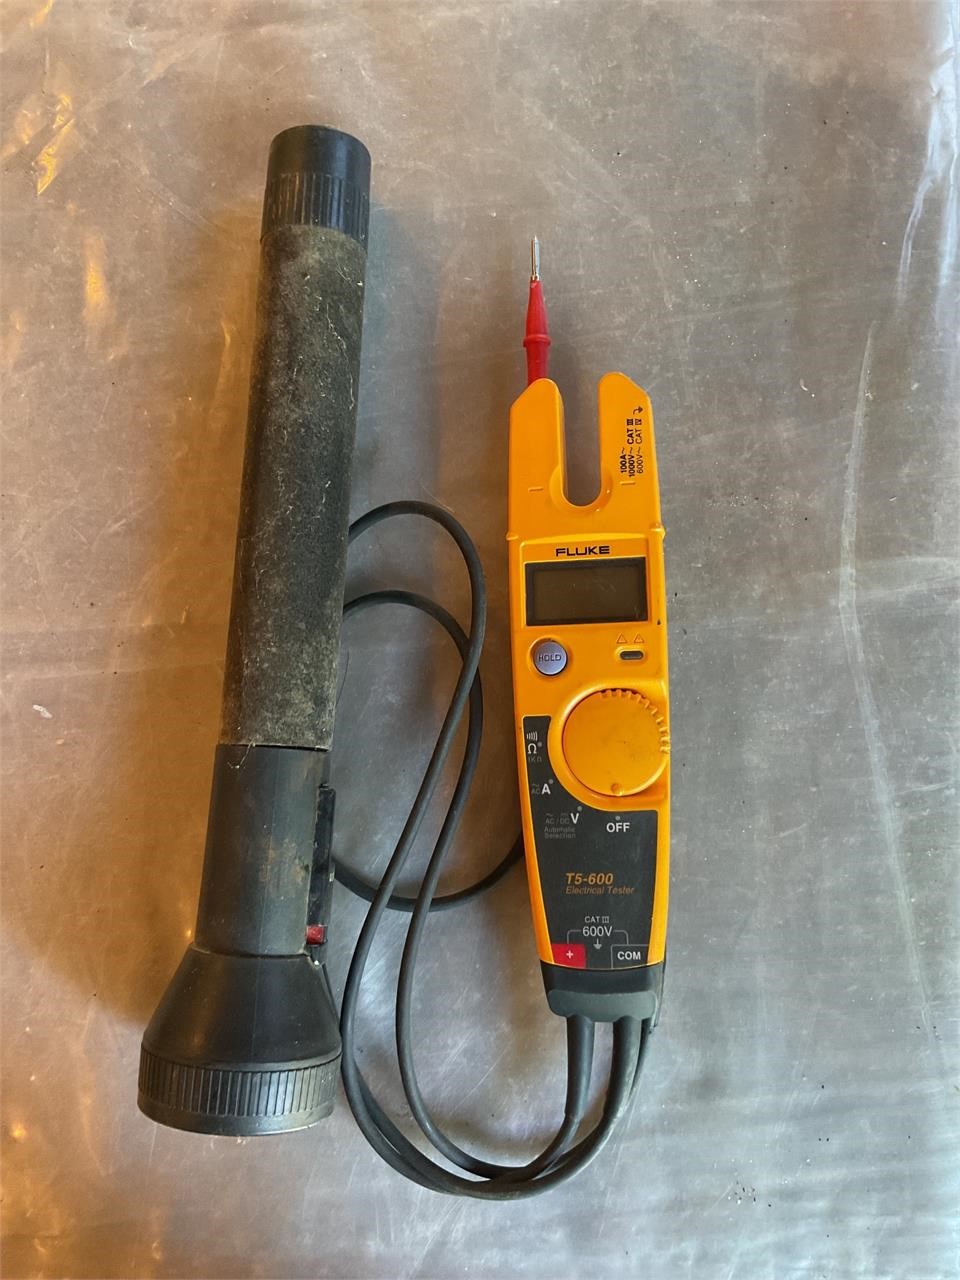 Electrical tester and flashlight